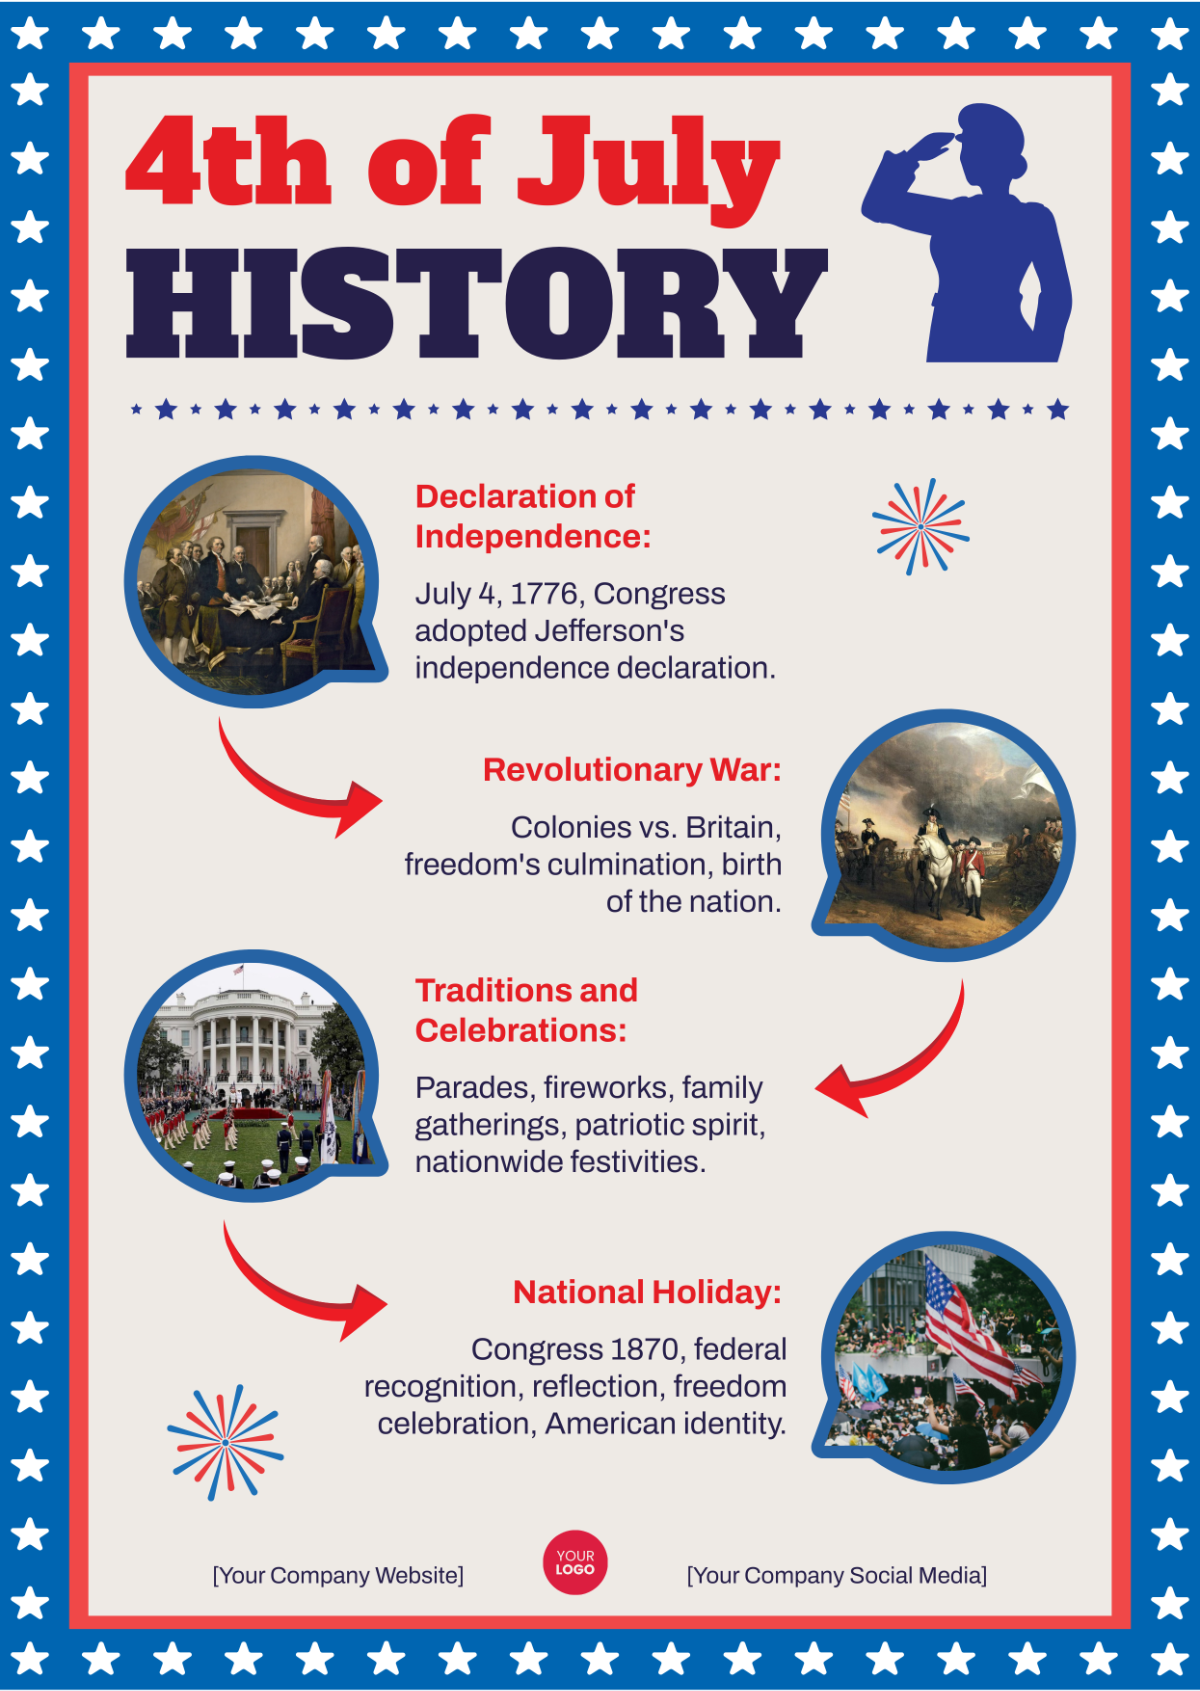 4th of July History